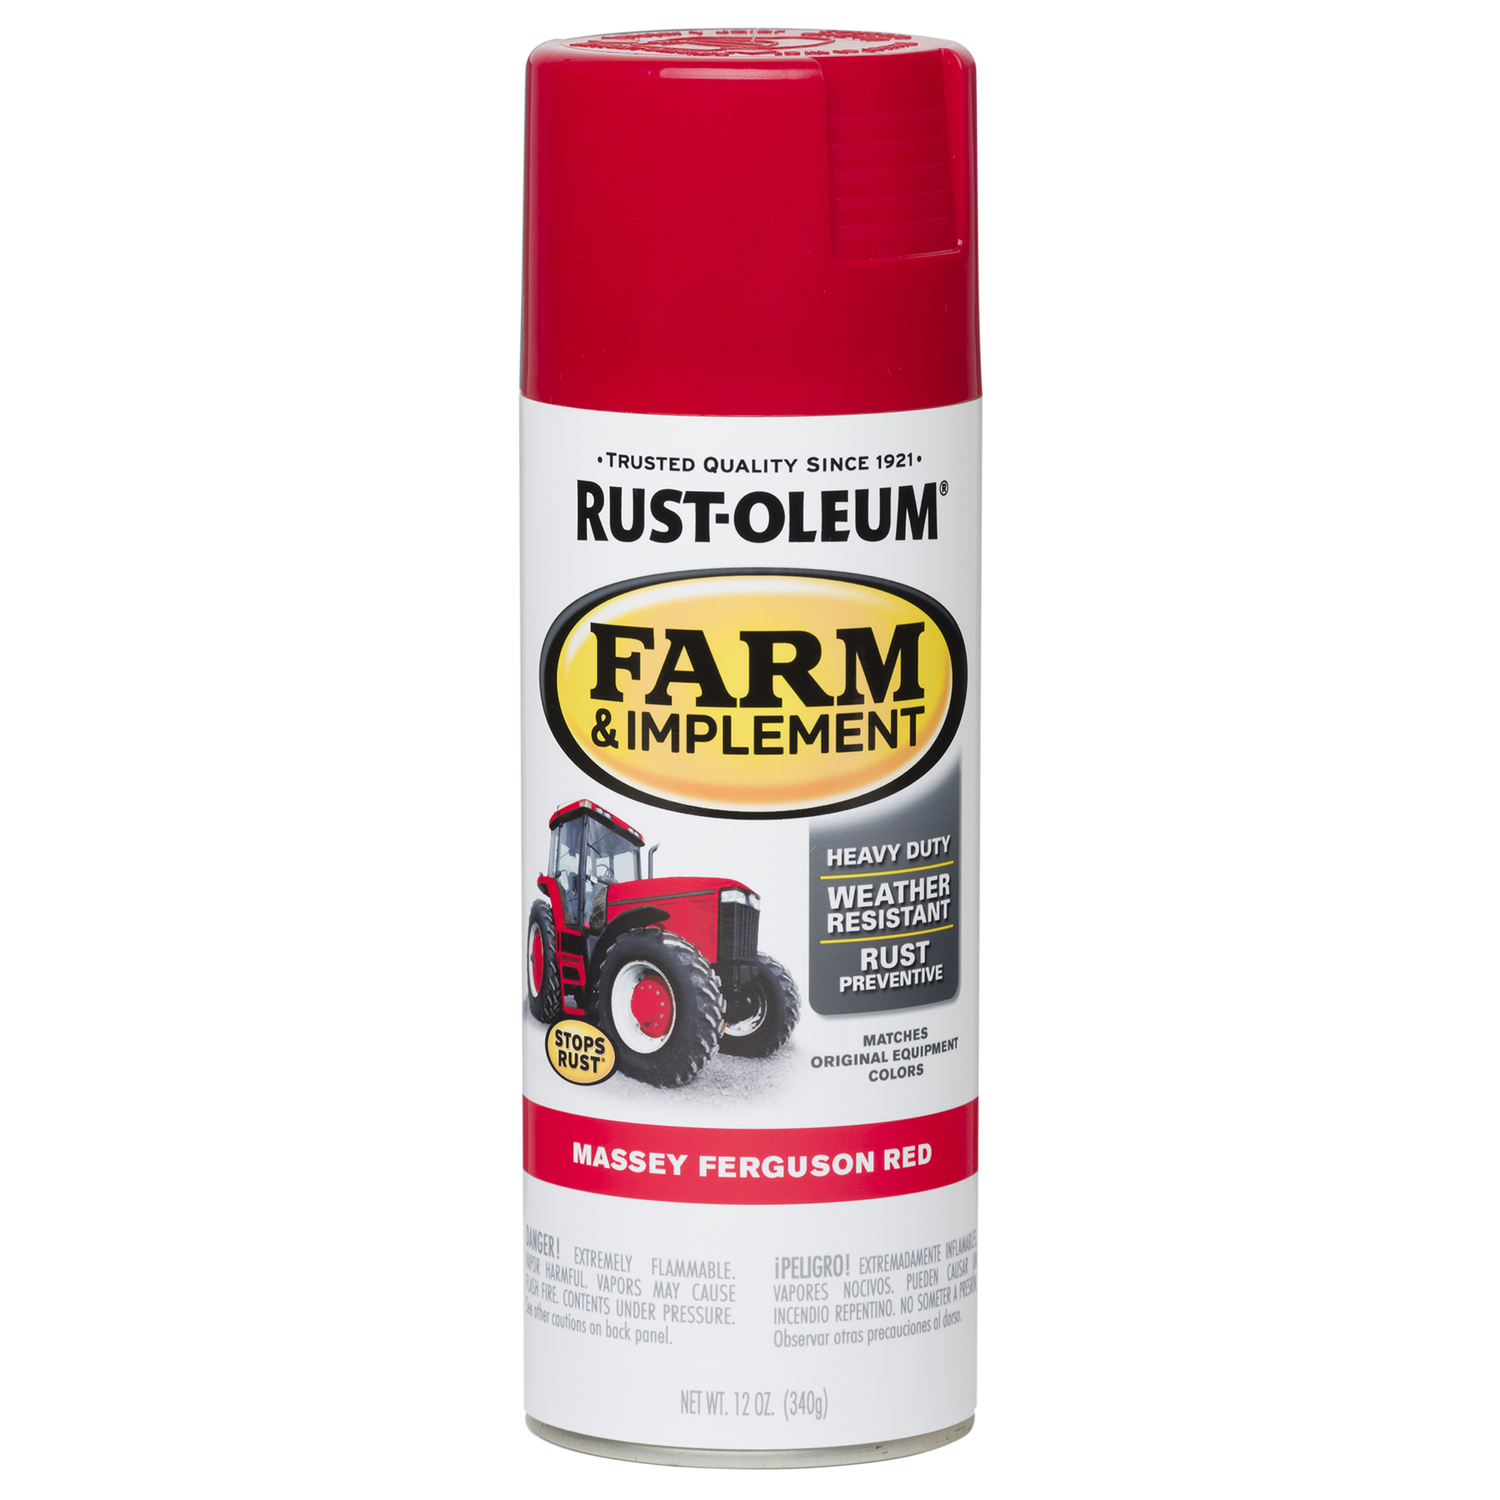 Rust-Oleum Specialty Indoor and Outdoor Gloss Massey Ferguson Red Farm & Implement 12 oz